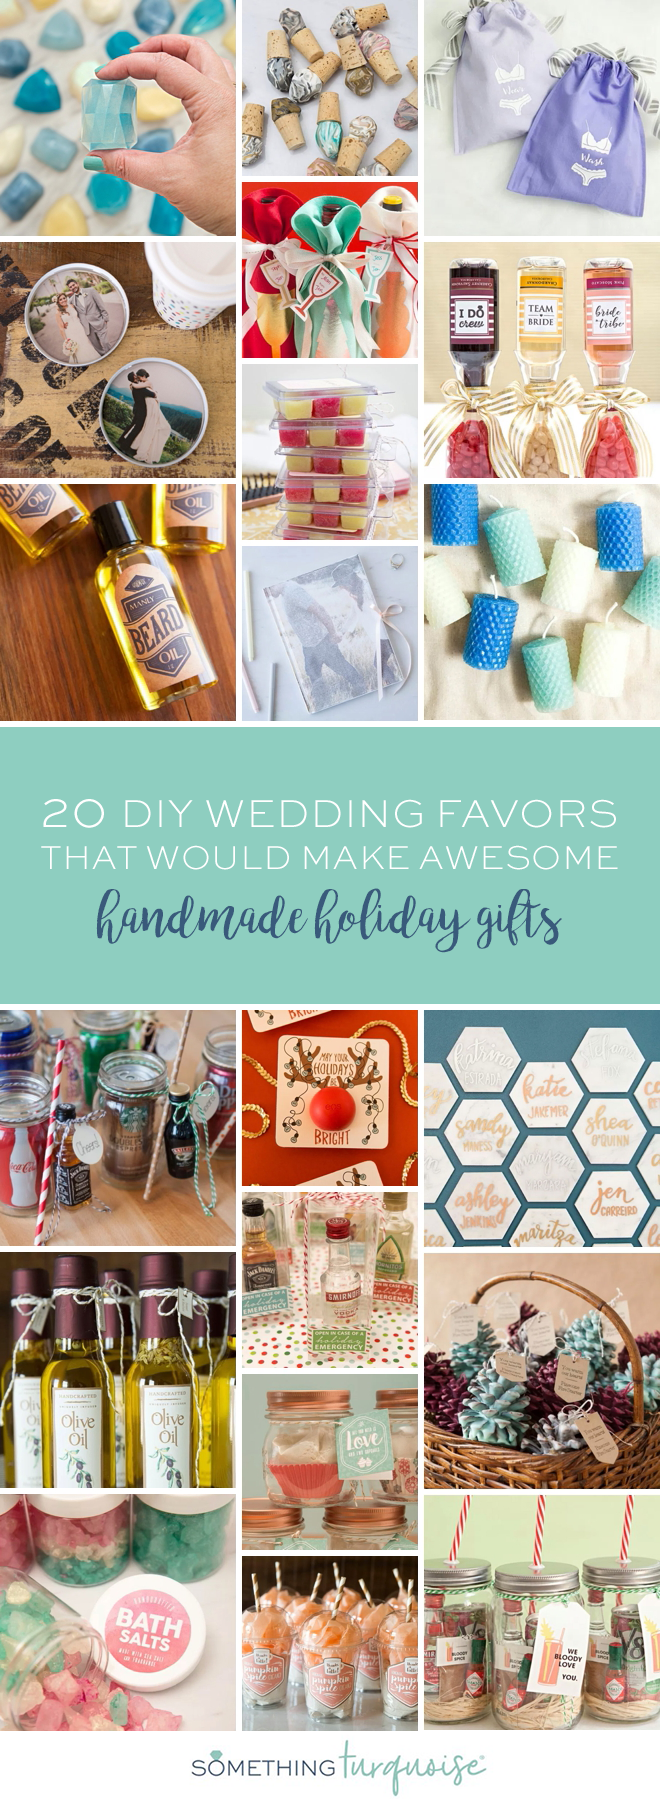 20 of our best wedding DIY's that would make awesome handmade holiday gifts!